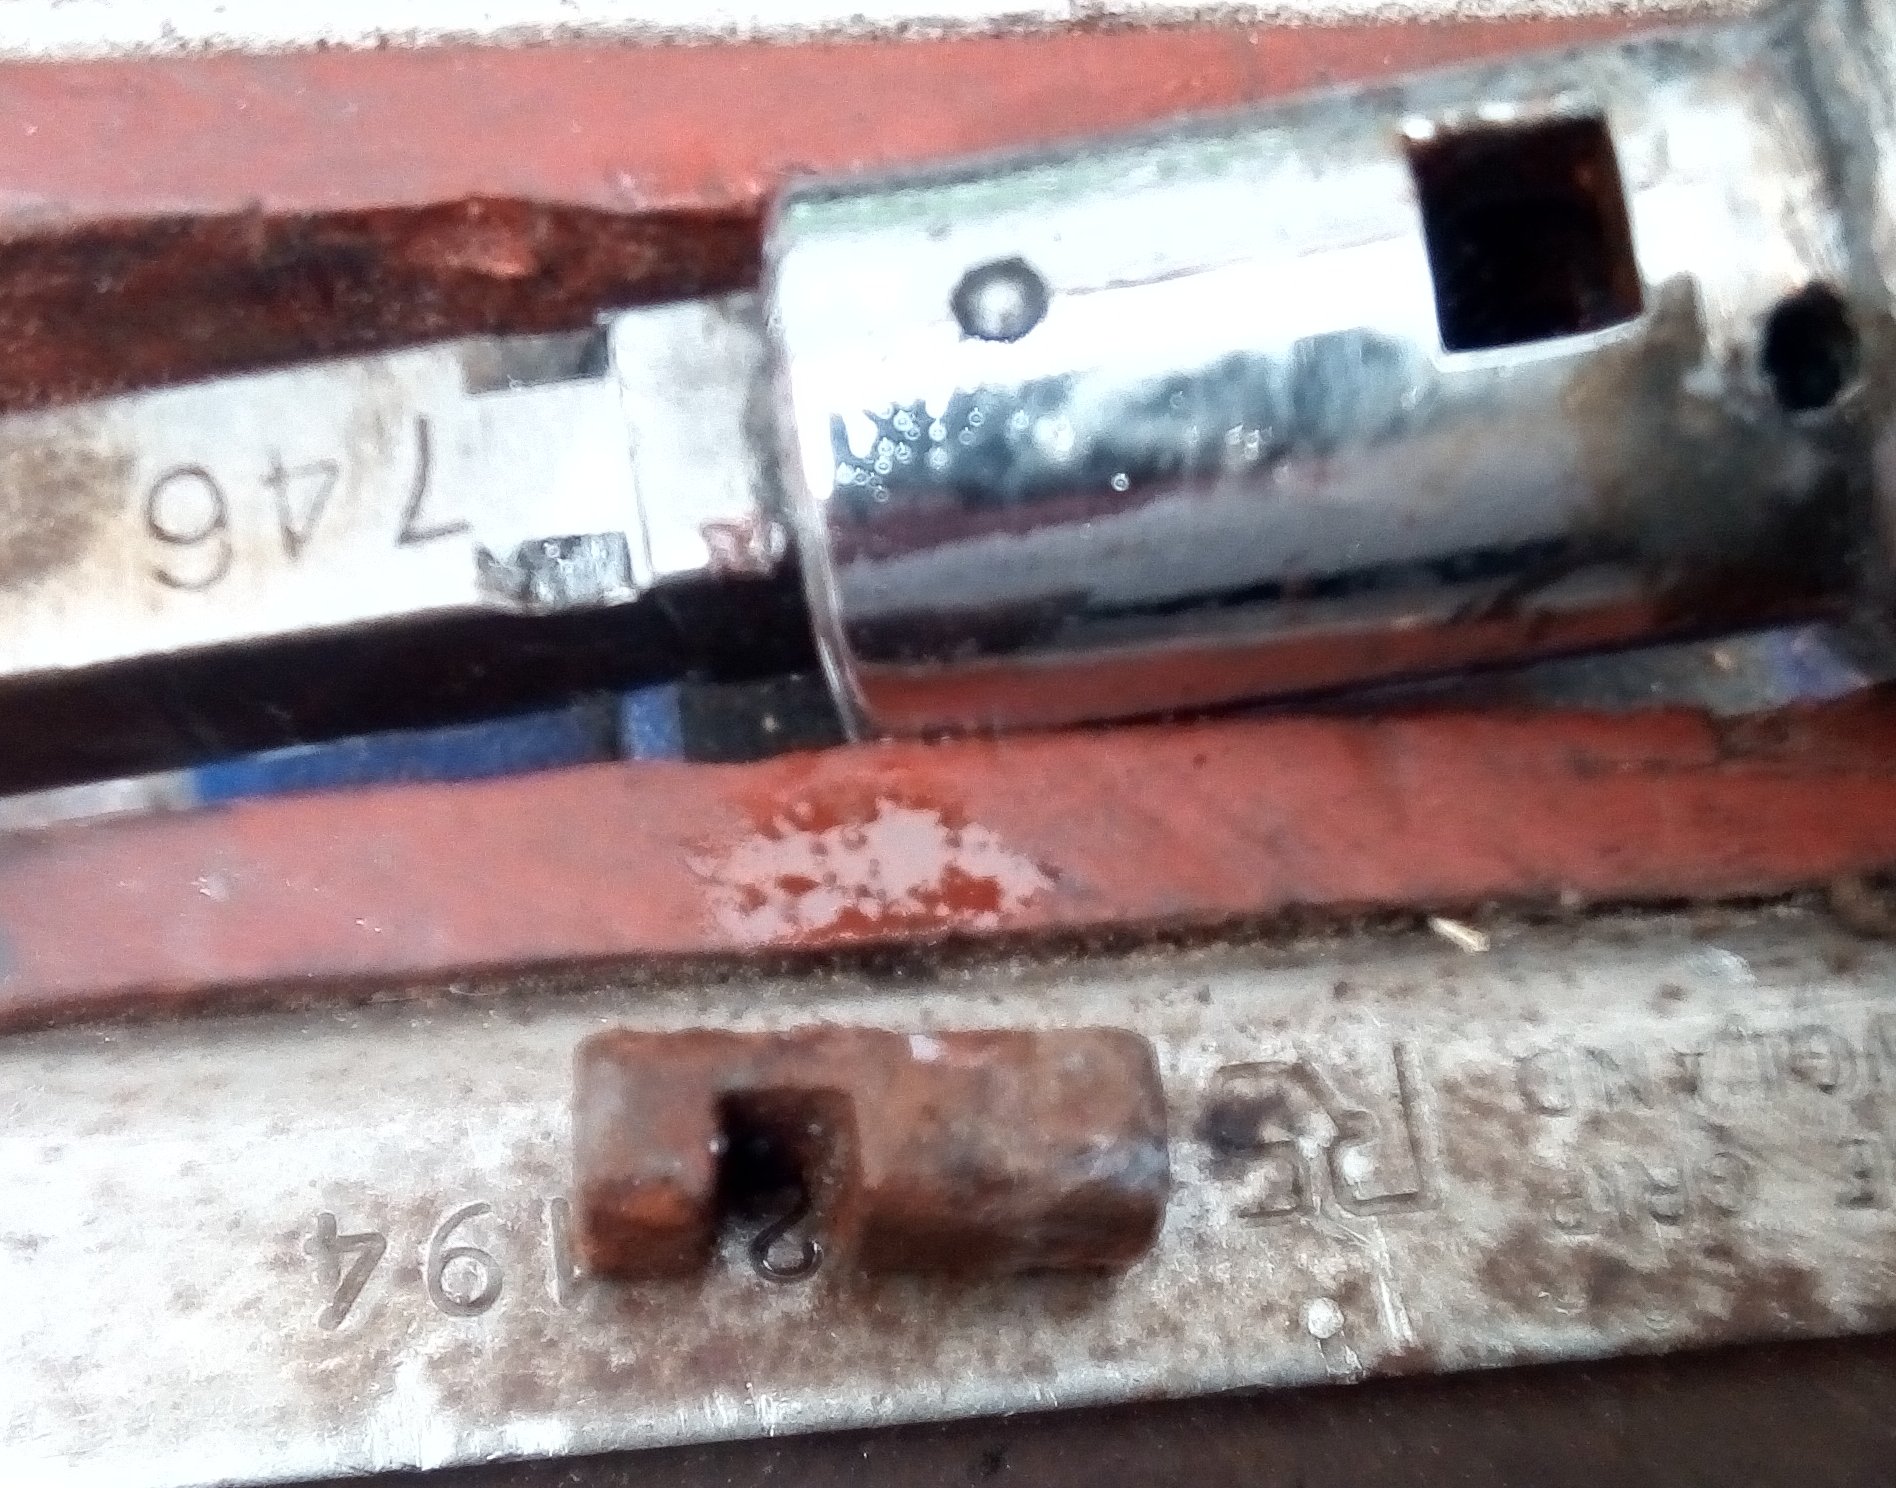 9-Lock bolt punched out.jpg